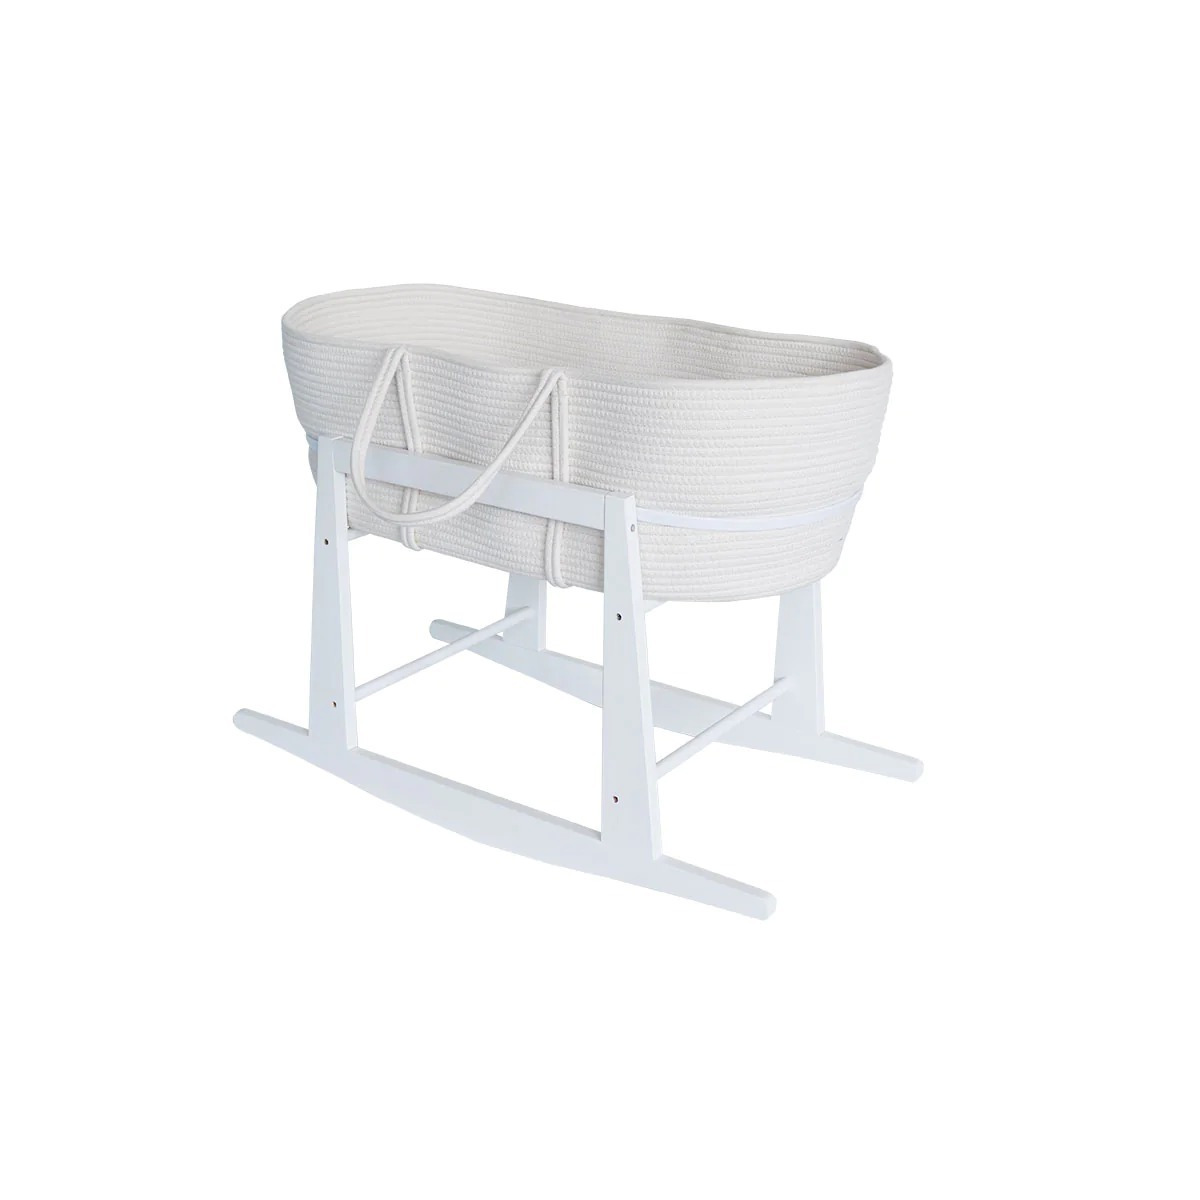 Snuggletime Woven Moses Basket & Stand - White